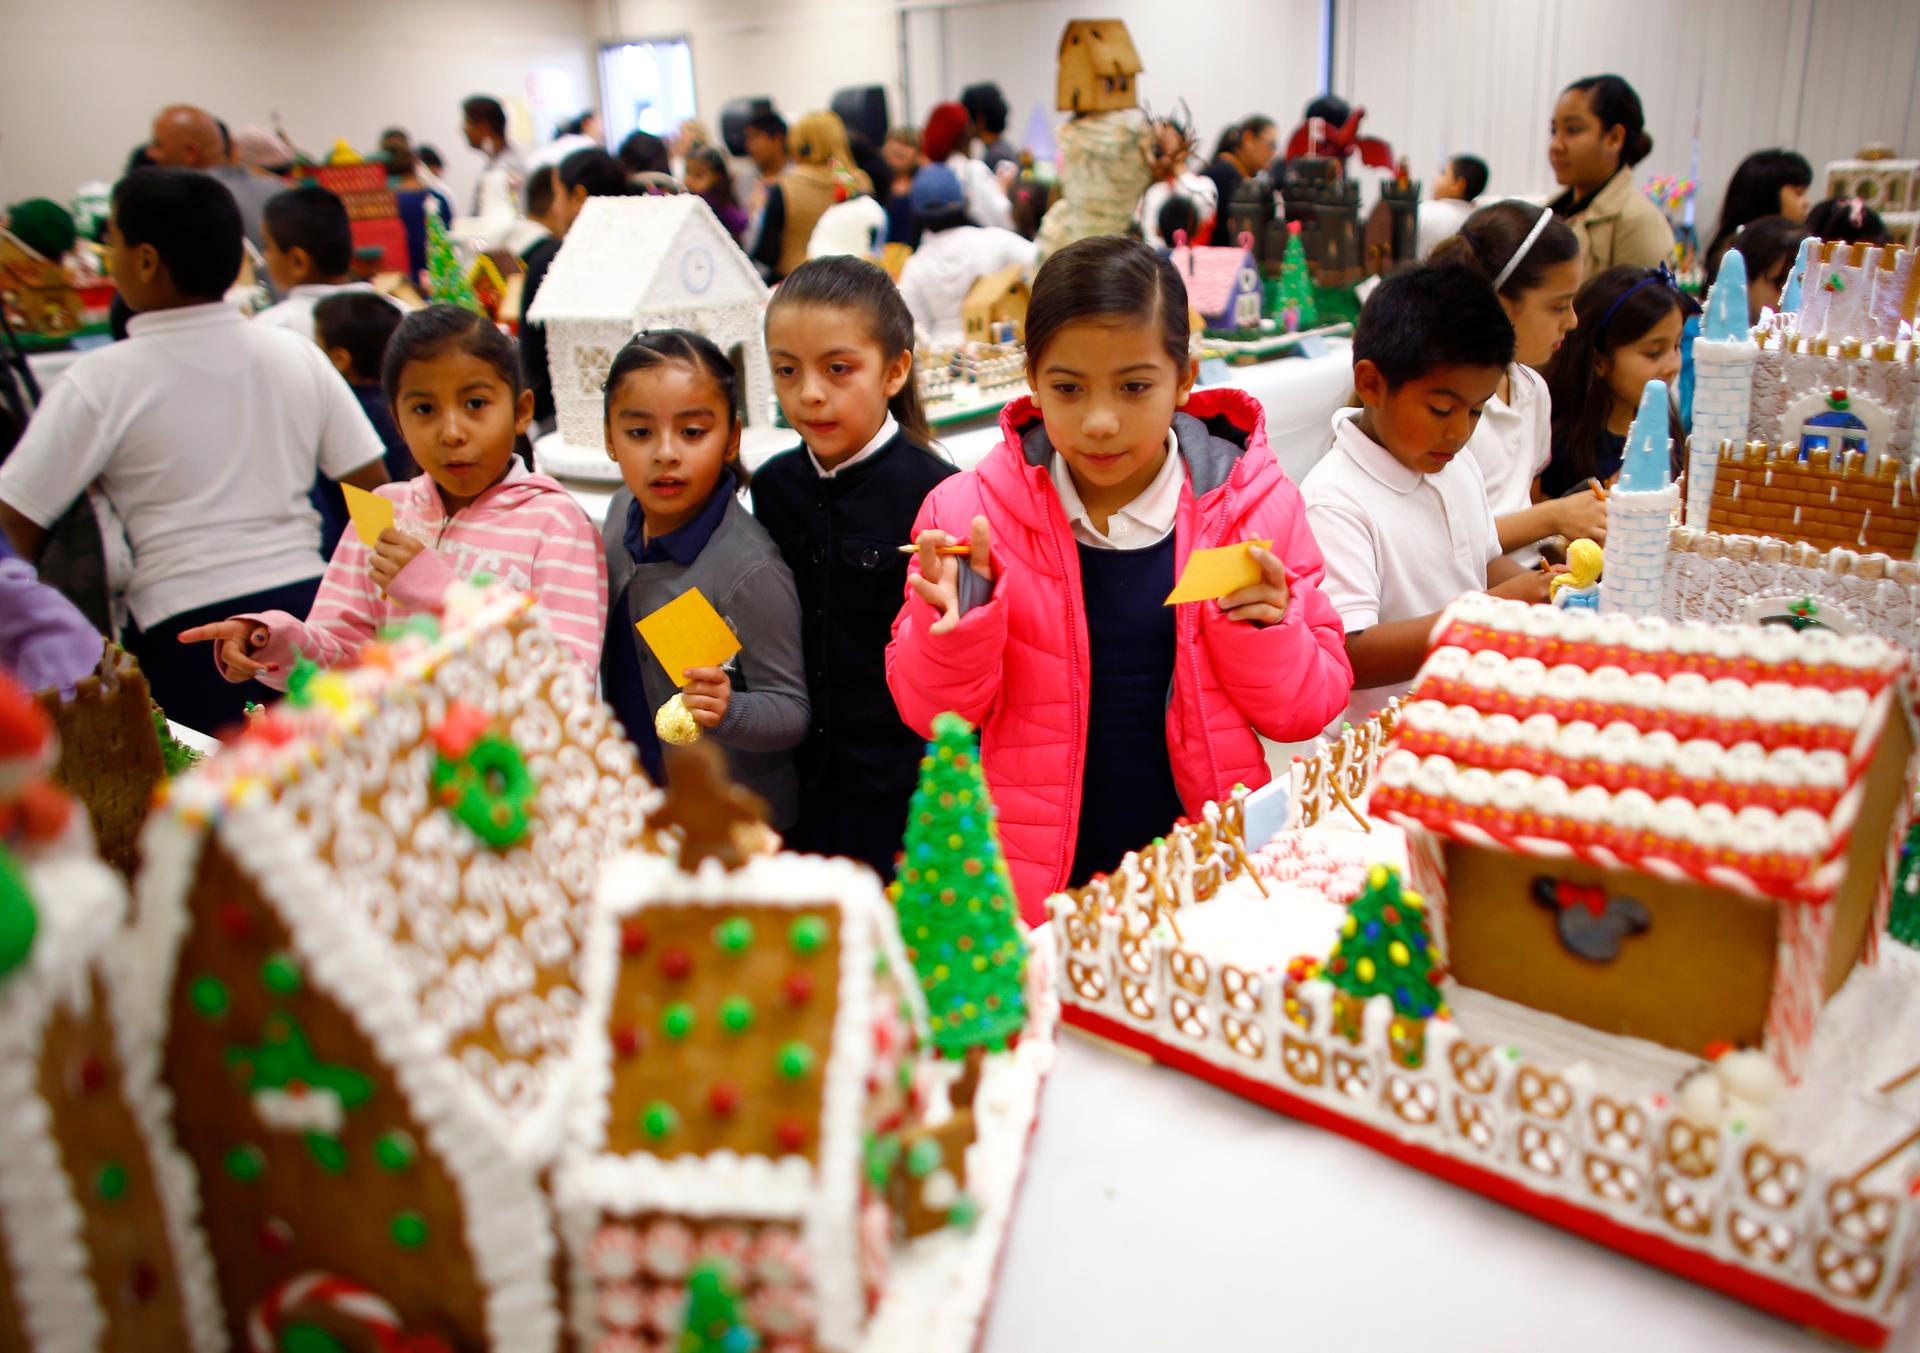 Local elementary school students vote for fairy tale and movie-themed gingerbread houses created by pastry students from the San Ysidro Adult School Culinary Arts program in San Ysidro, California on December 9, 2014.